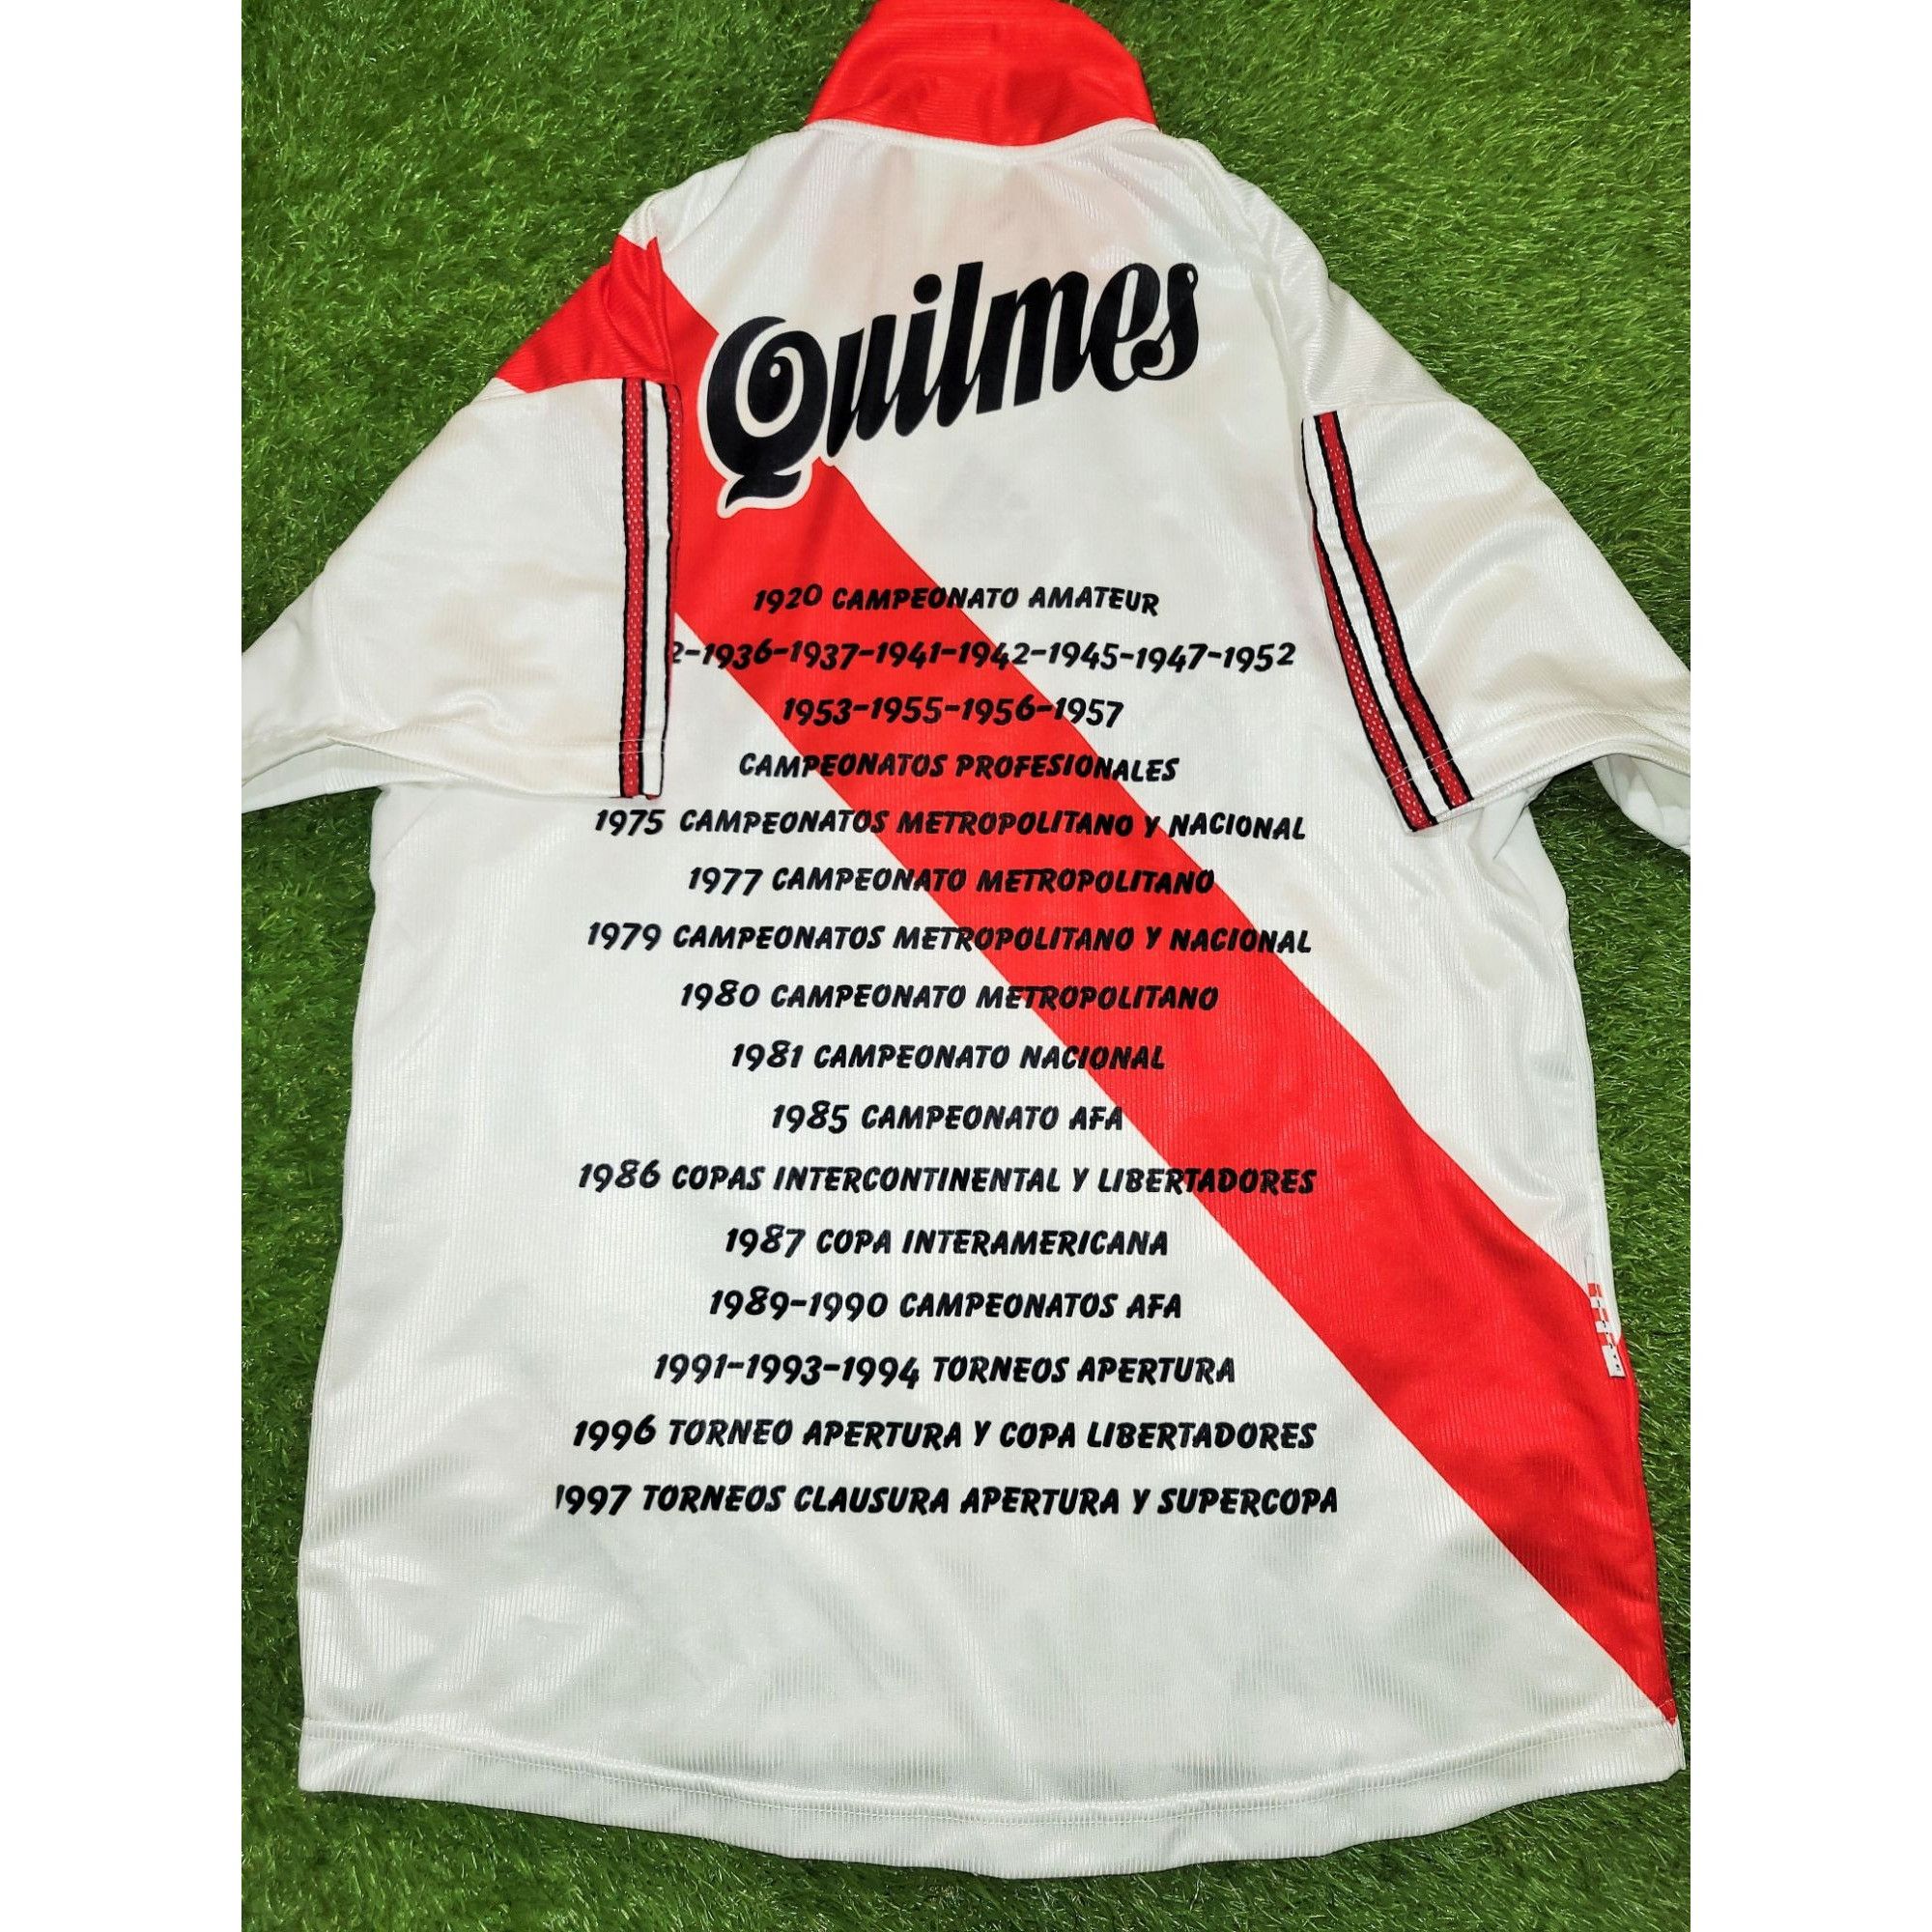 Adidas River Plate Adidas 1998 1999 2000 LTD EDITION Soccer Jersey Size US M / EU 48-50 / 2 - 2 Preview